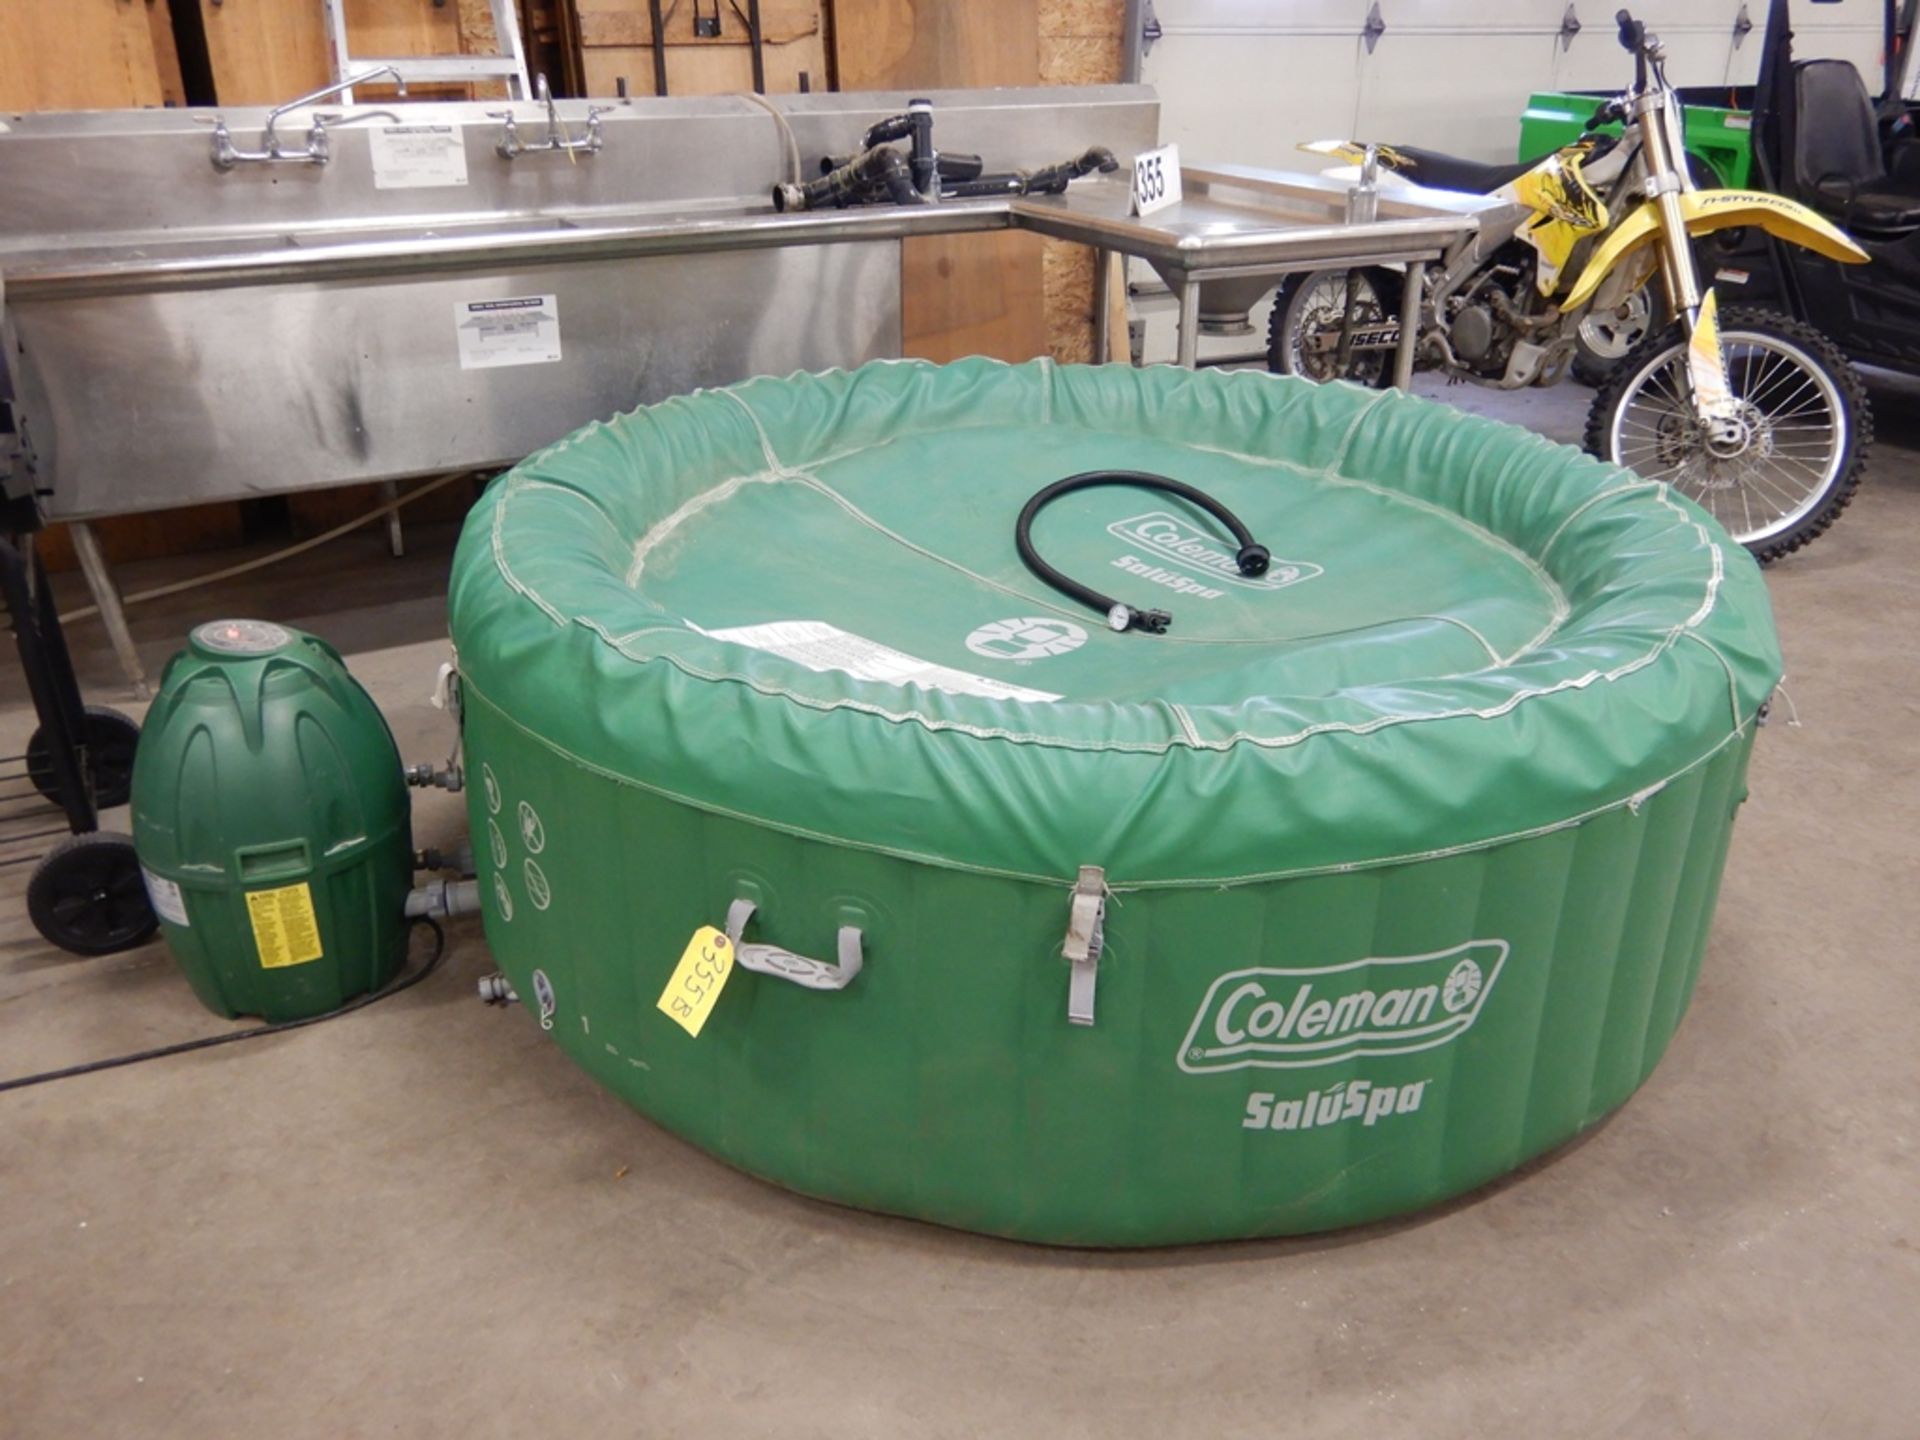 COLEMAN SALUSPA SOFT TUB HOT TUB WITH SALUSPA PUMP HEATER JETS AND INFLATION HOSE AND GAUGE